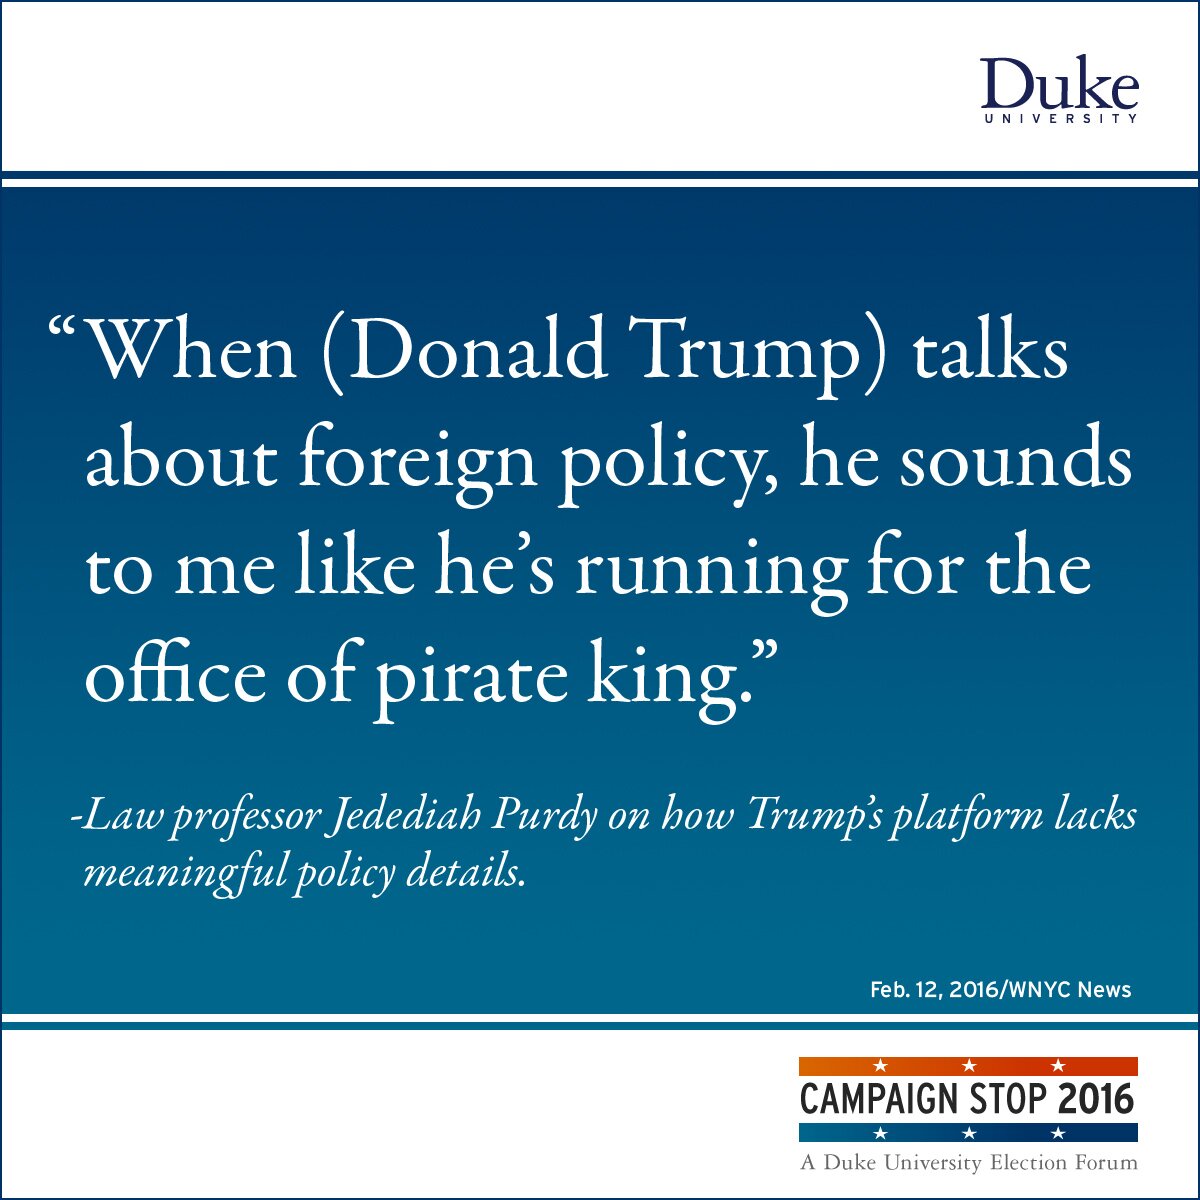 “When (Donald Trump) talks about foreign policy, he sounds to me like he’s running for the office of pirate king.” - Law professor Jedediah Purdy on how Trump’s platform lacks meaningful policy details.